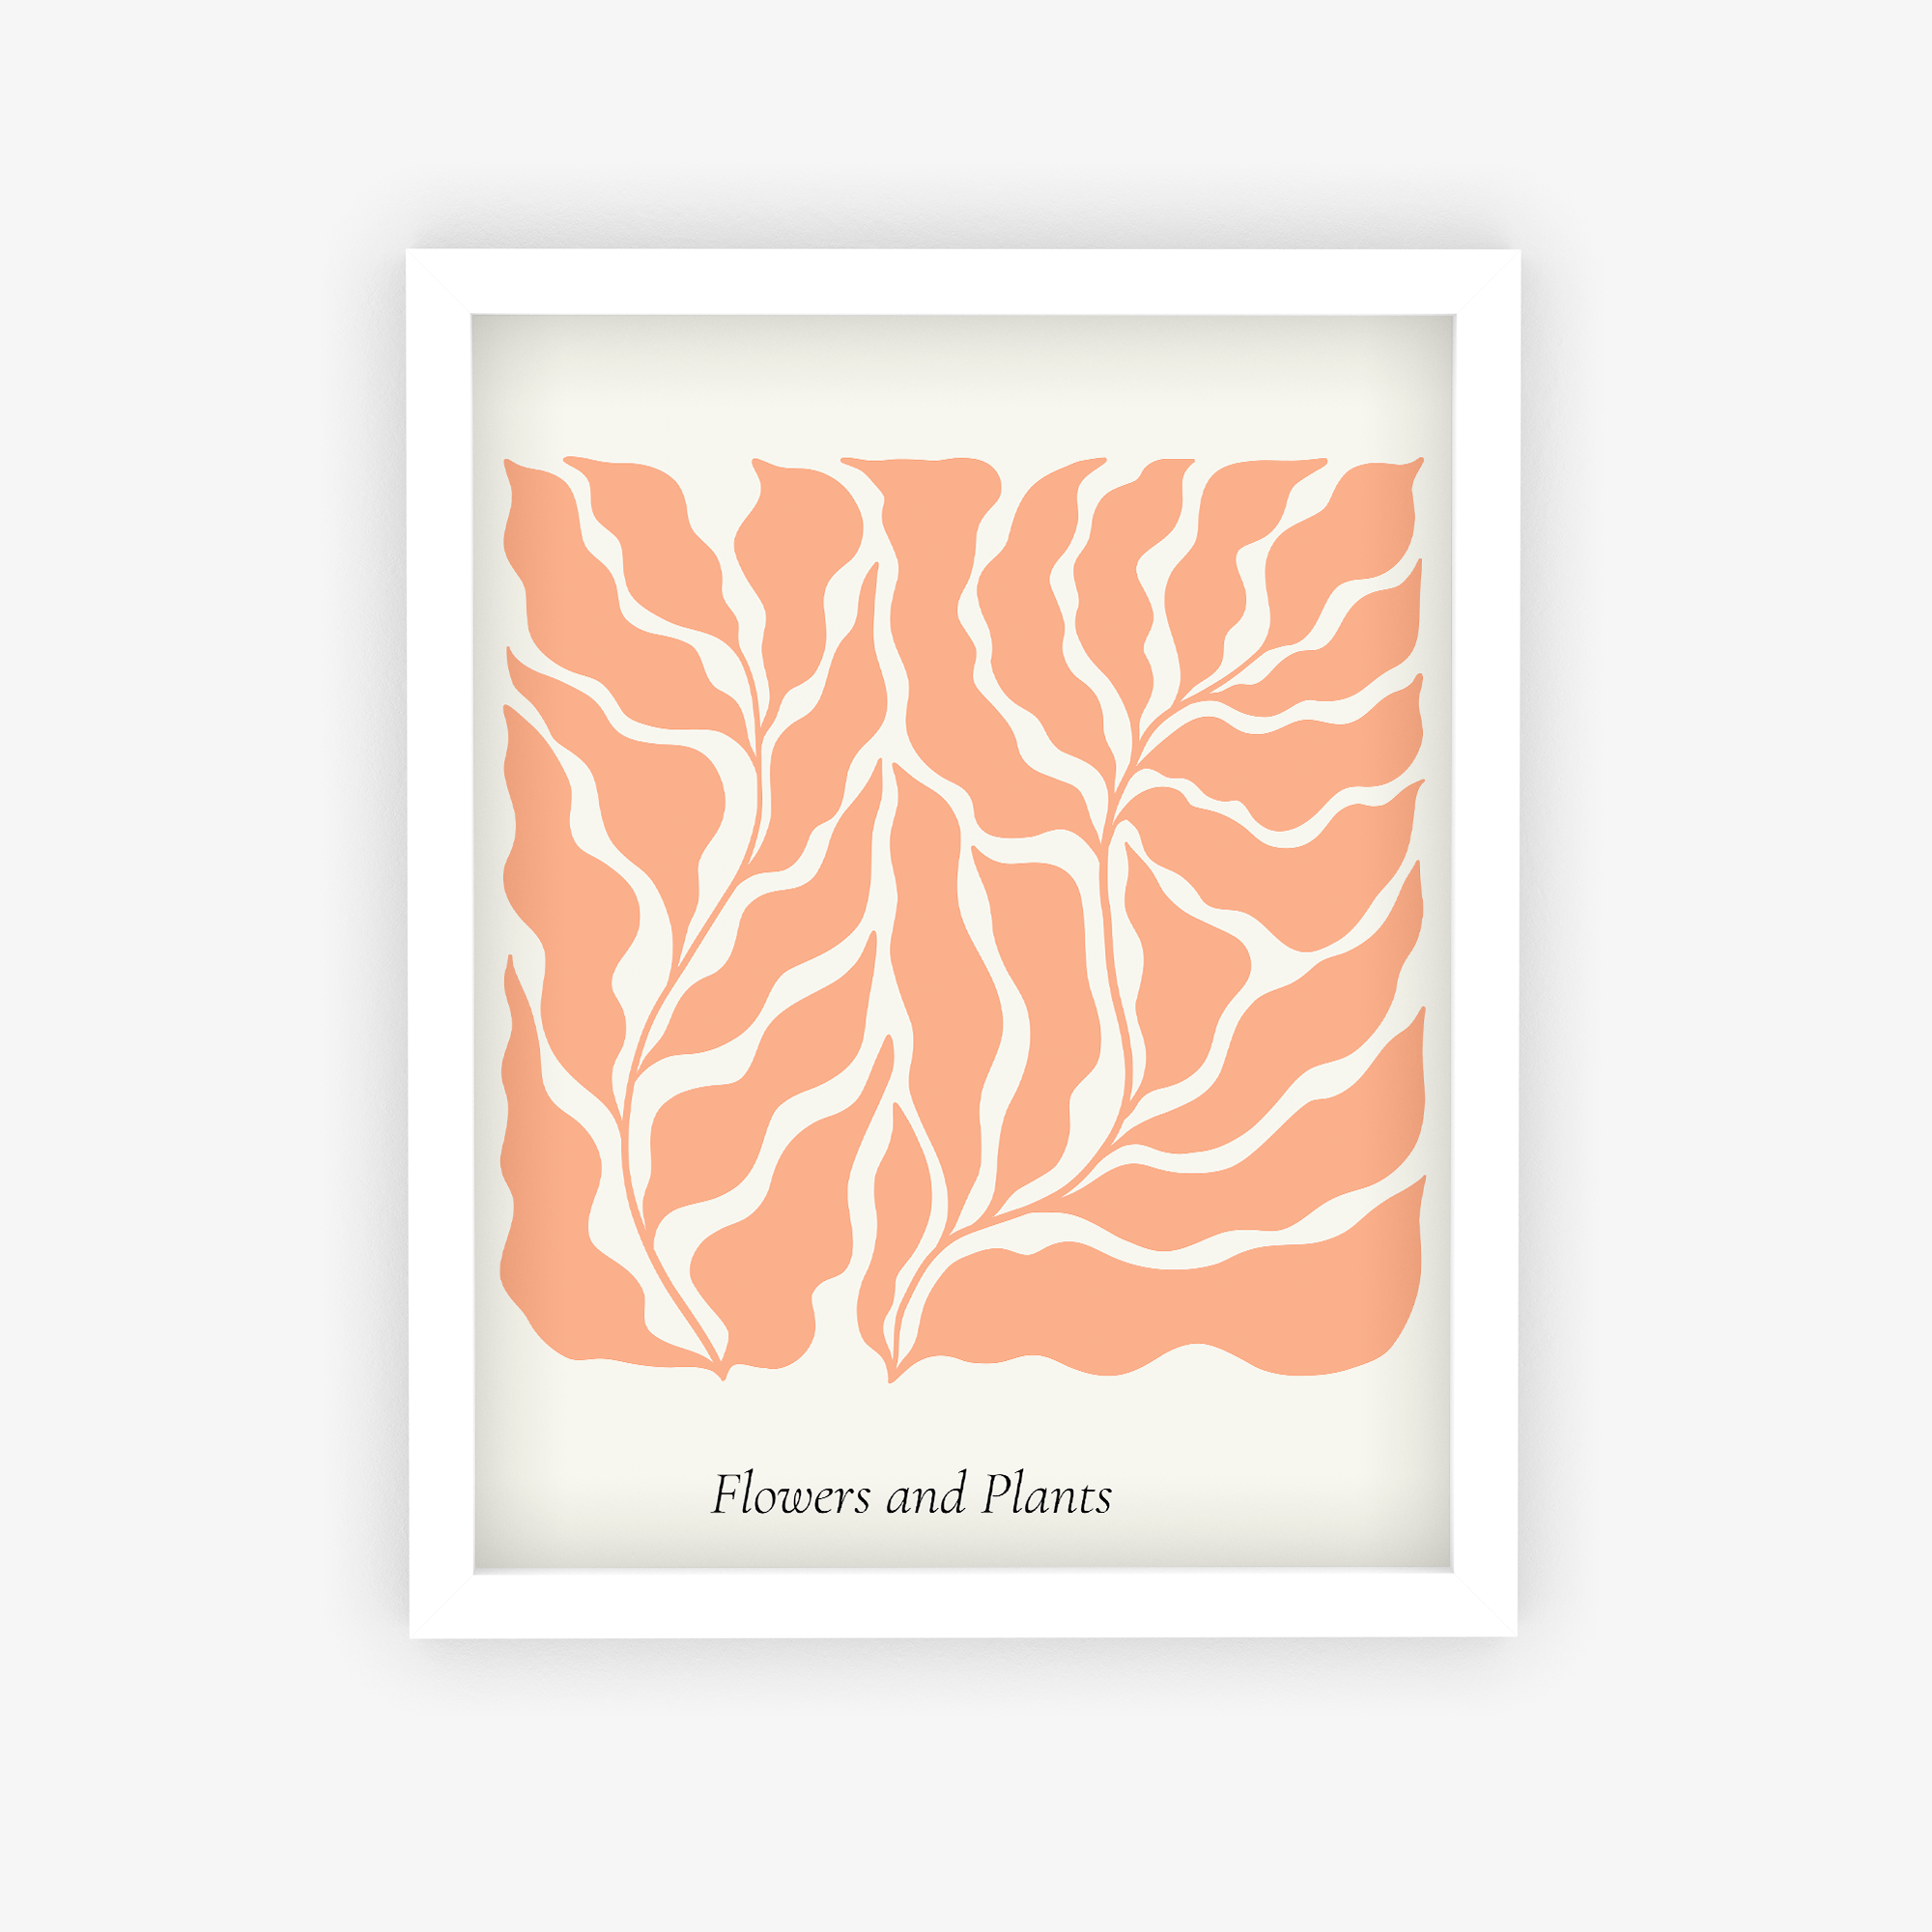 Flowers and Plants Poster